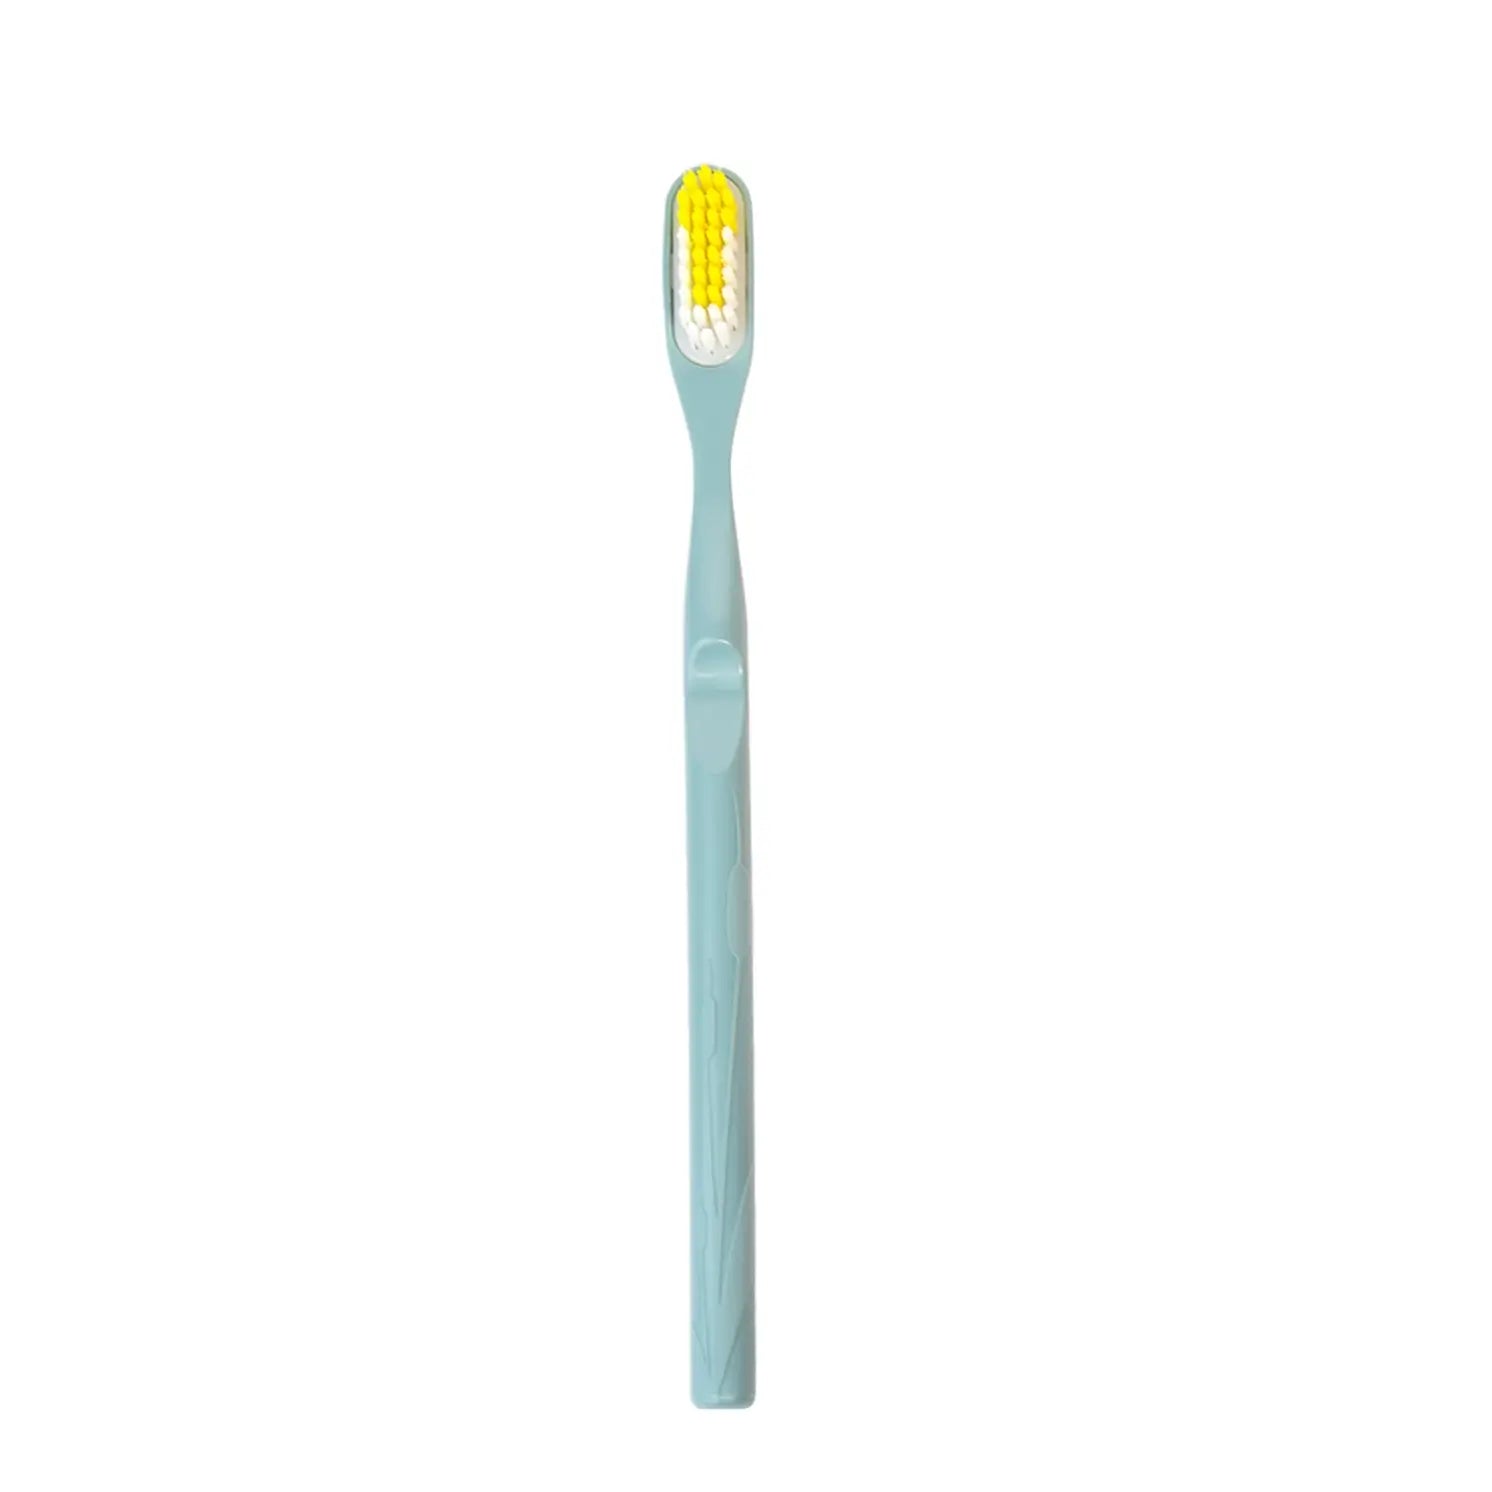 Toothbrush with replaceable-head